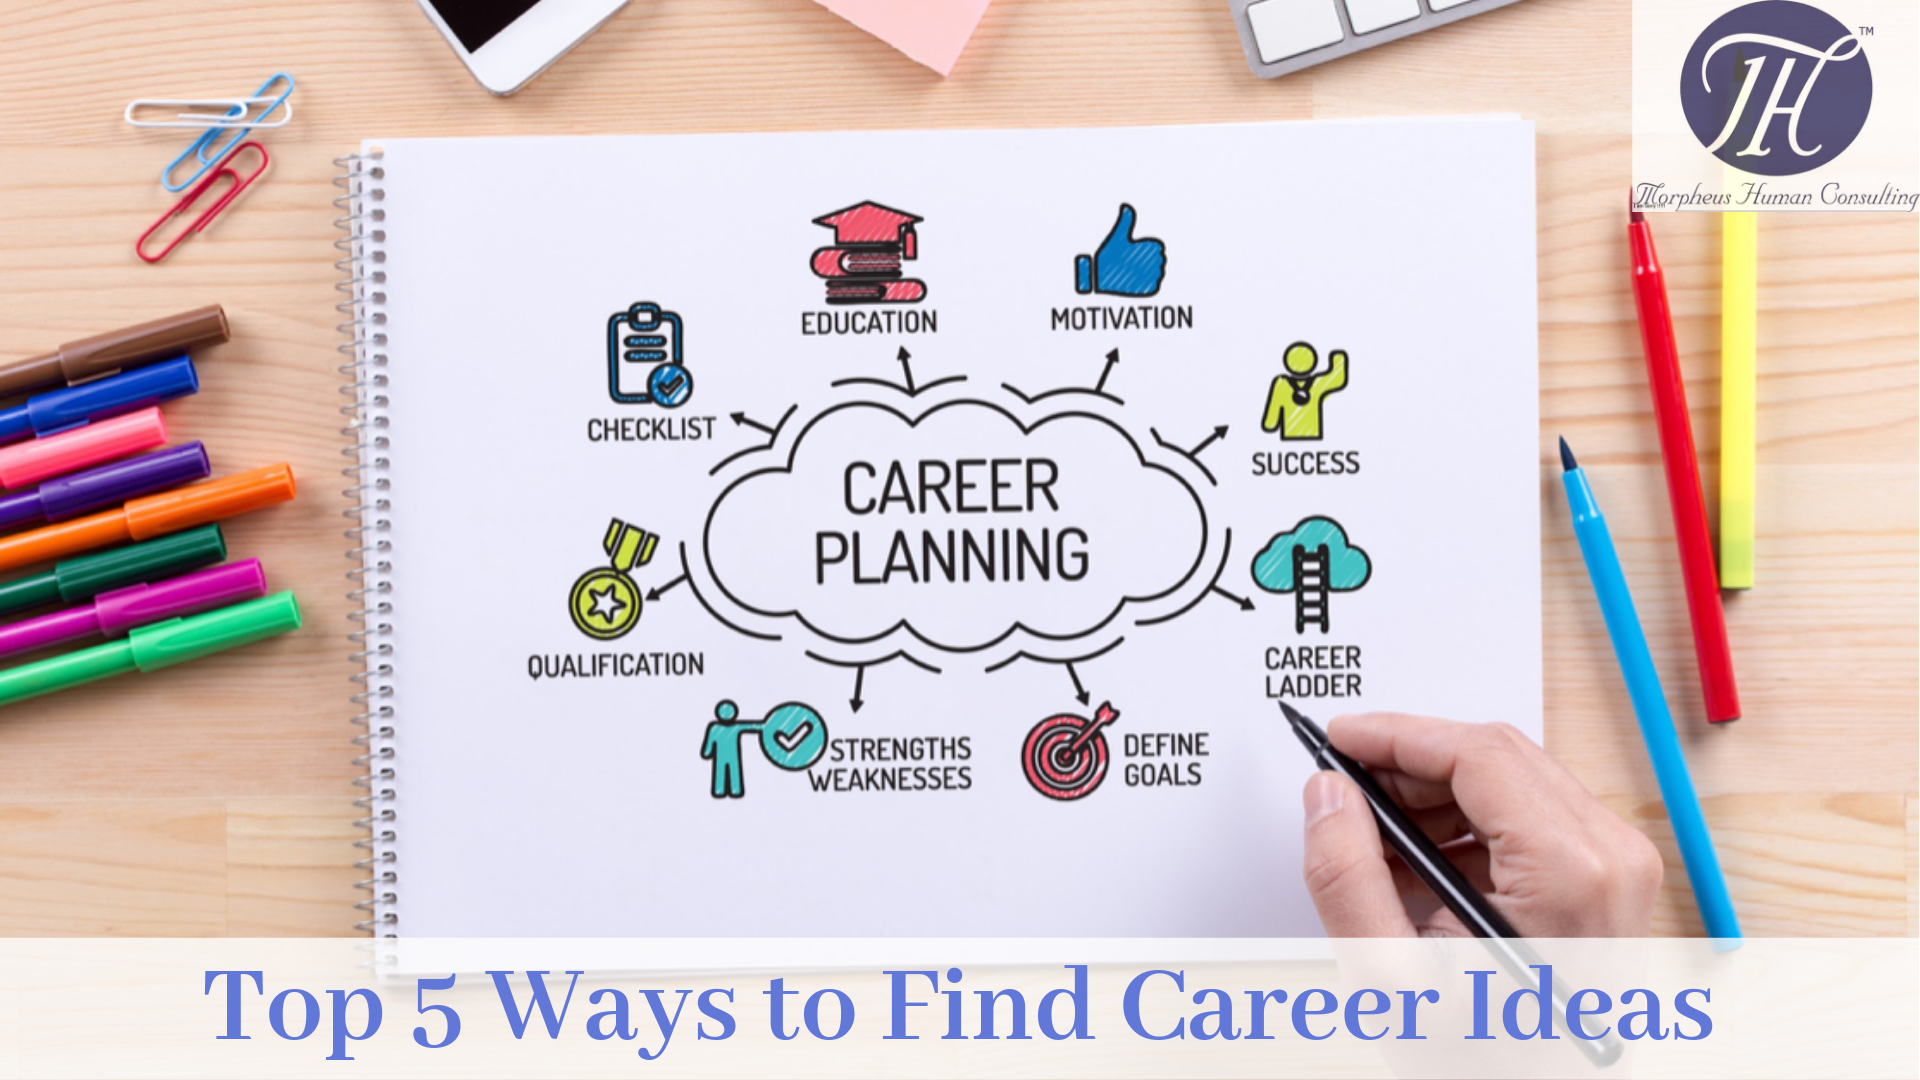 Top 5 Ways to Find Career Ideas